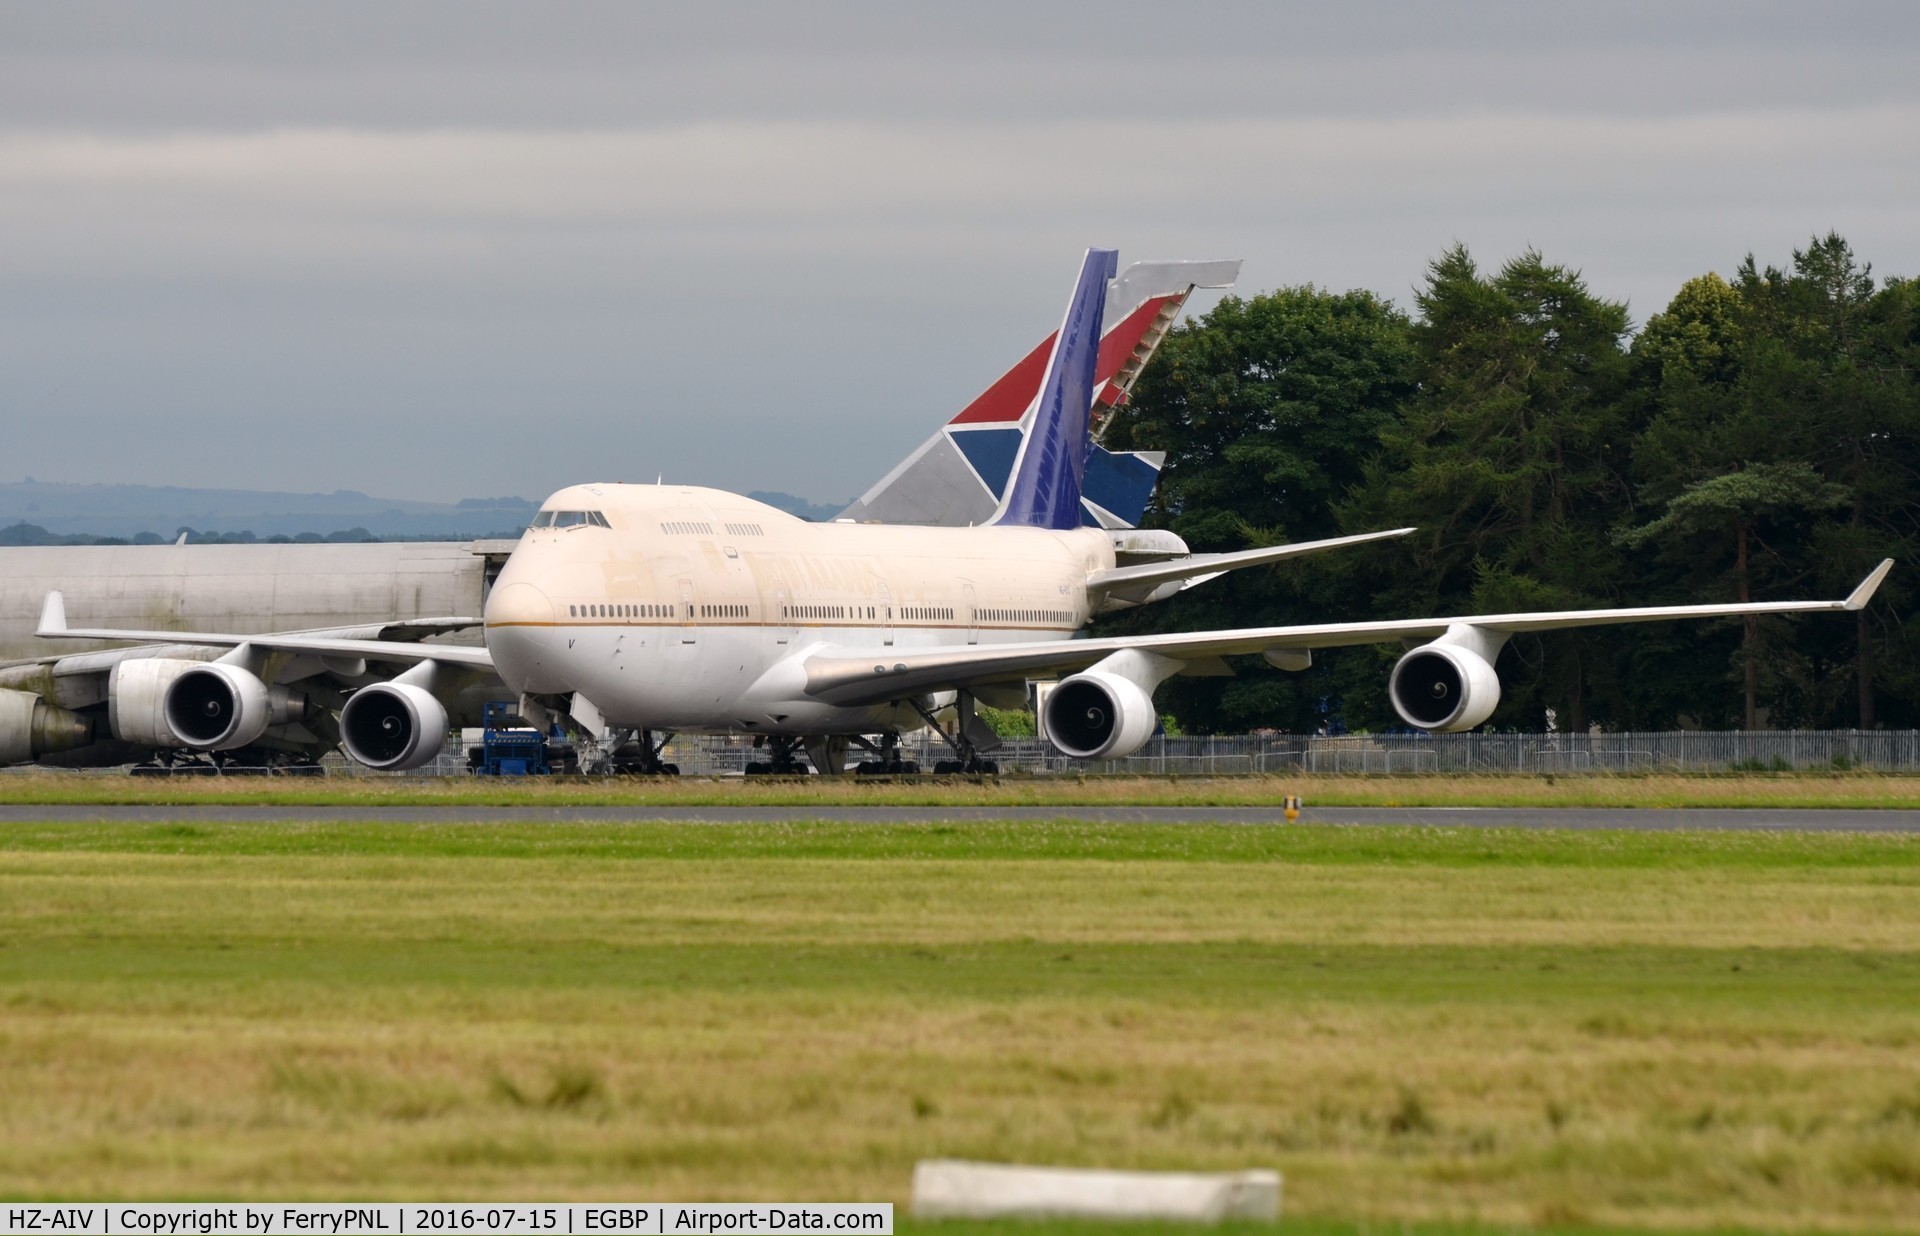 HZ-AIV, 1997 Boeing 747-468 C/N 28339, Saudi B744 resting in Kemble and awaits the axe man.